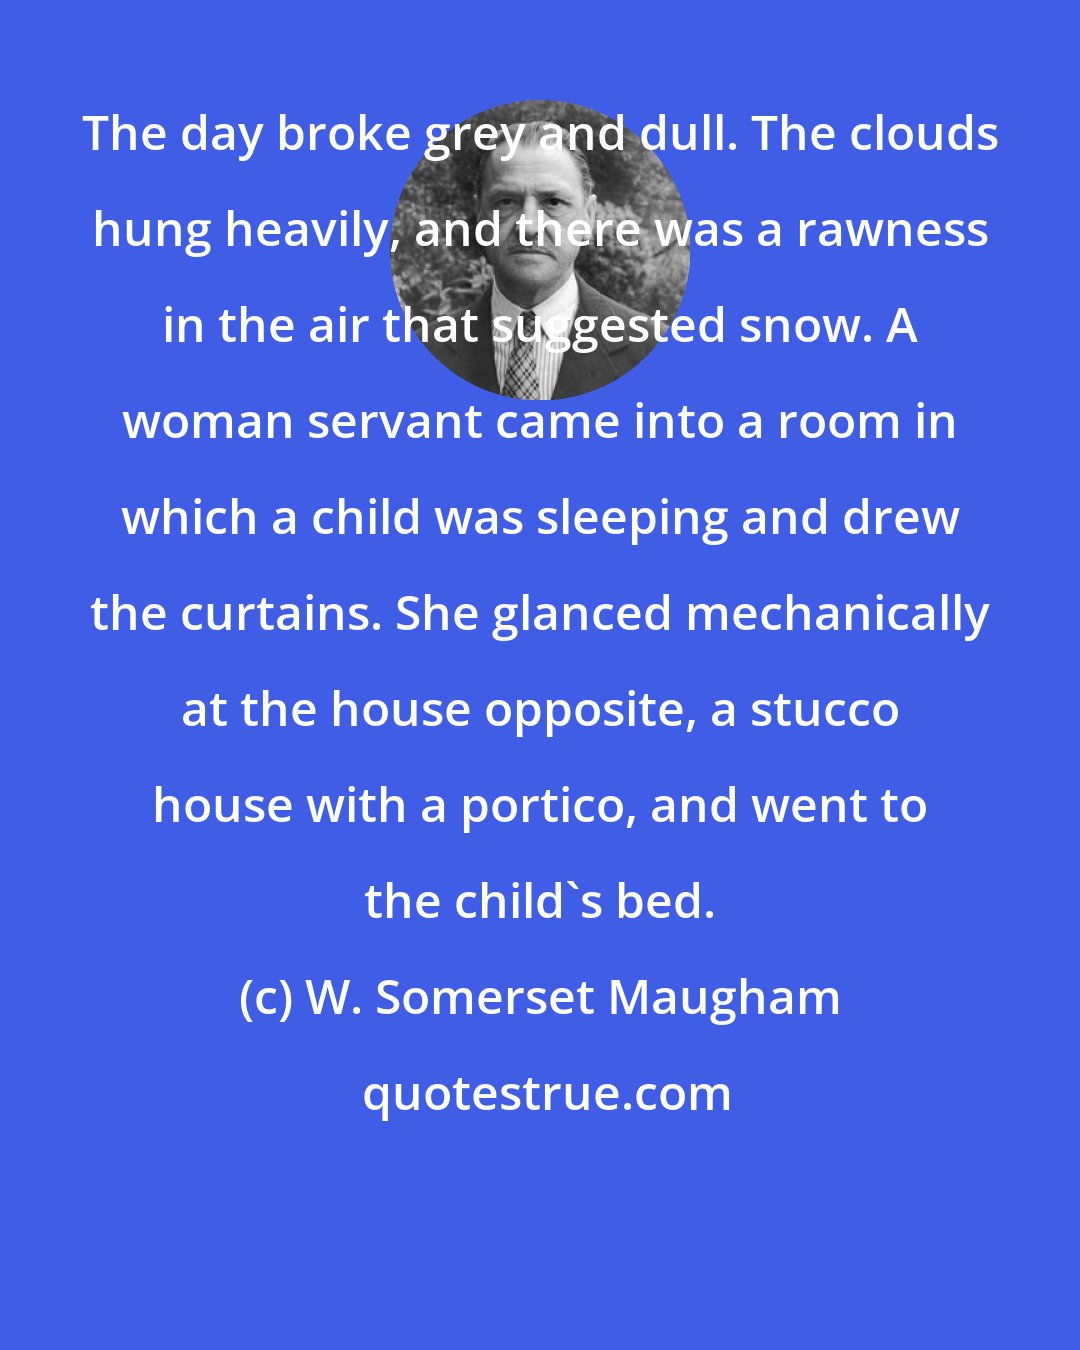 W. Somerset Maugham: The day broke grey and dull. The clouds hung heavily, and there was a rawness in the air that suggested snow. A woman servant came into a room in which a child was sleeping and drew the curtains. She glanced mechanically at the house opposite, a stucco house with a portico, and went to the child's bed.